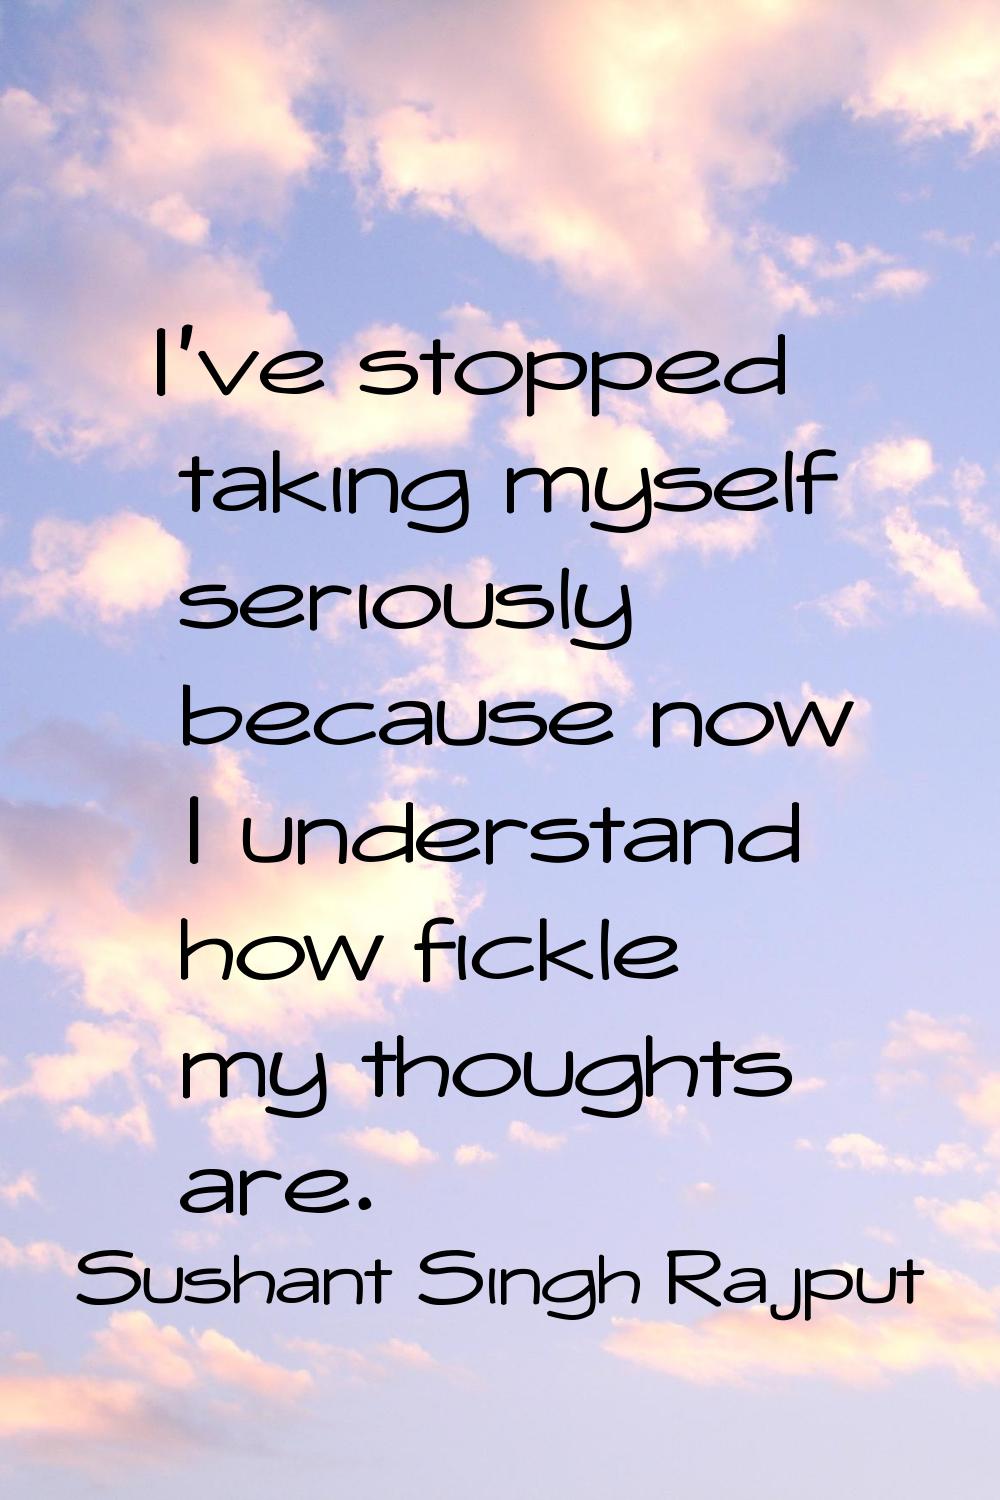 I've stopped taking myself seriously because now I understand how fickle my thoughts are.